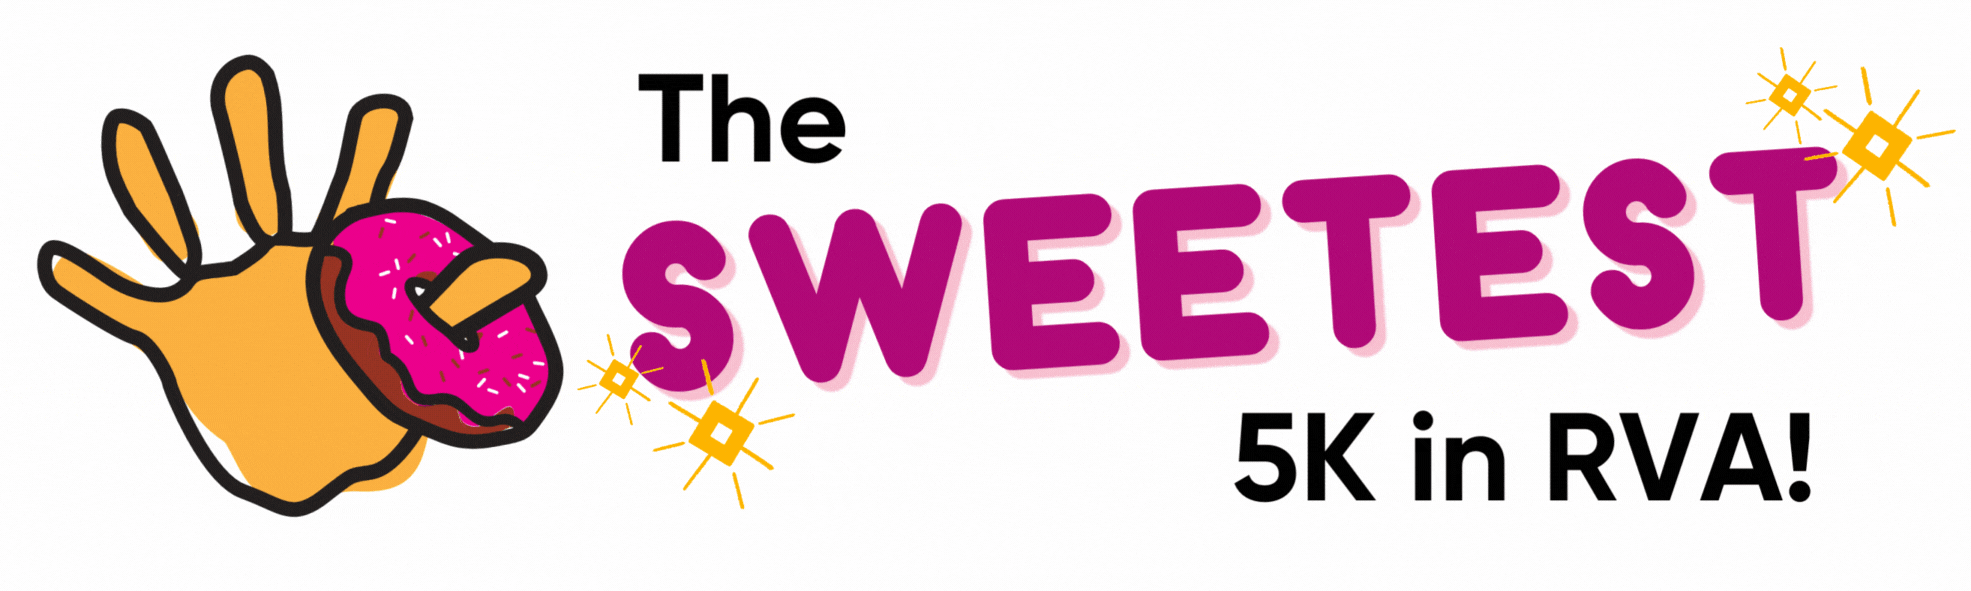 The Sweetest 5K in RVA!